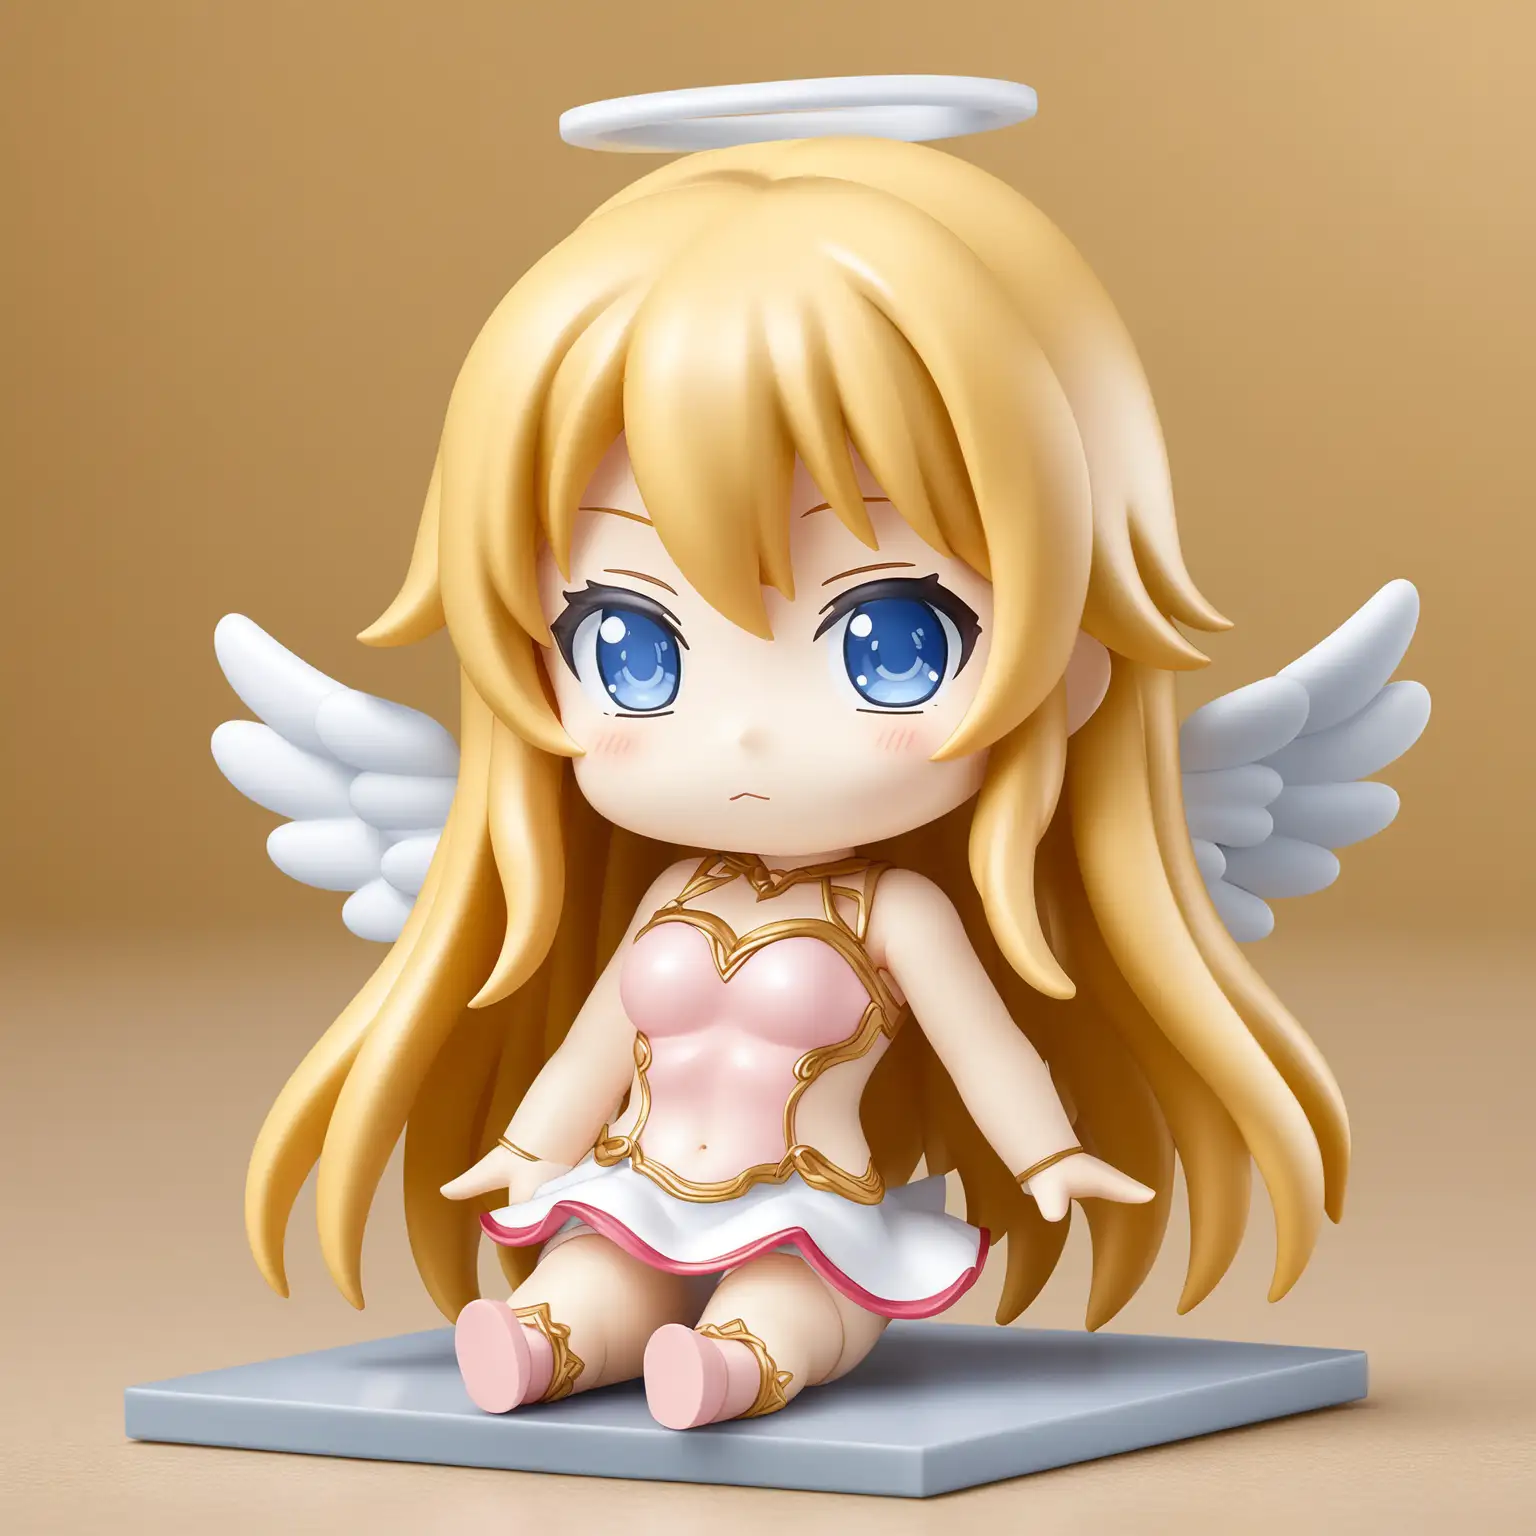 Draw a anime sexy women ,SD style, chibi style,  nendoroid, sitting on floor , light pink angel costume, angel wing , short skirt, blonde long hair, fantastic background, full body.